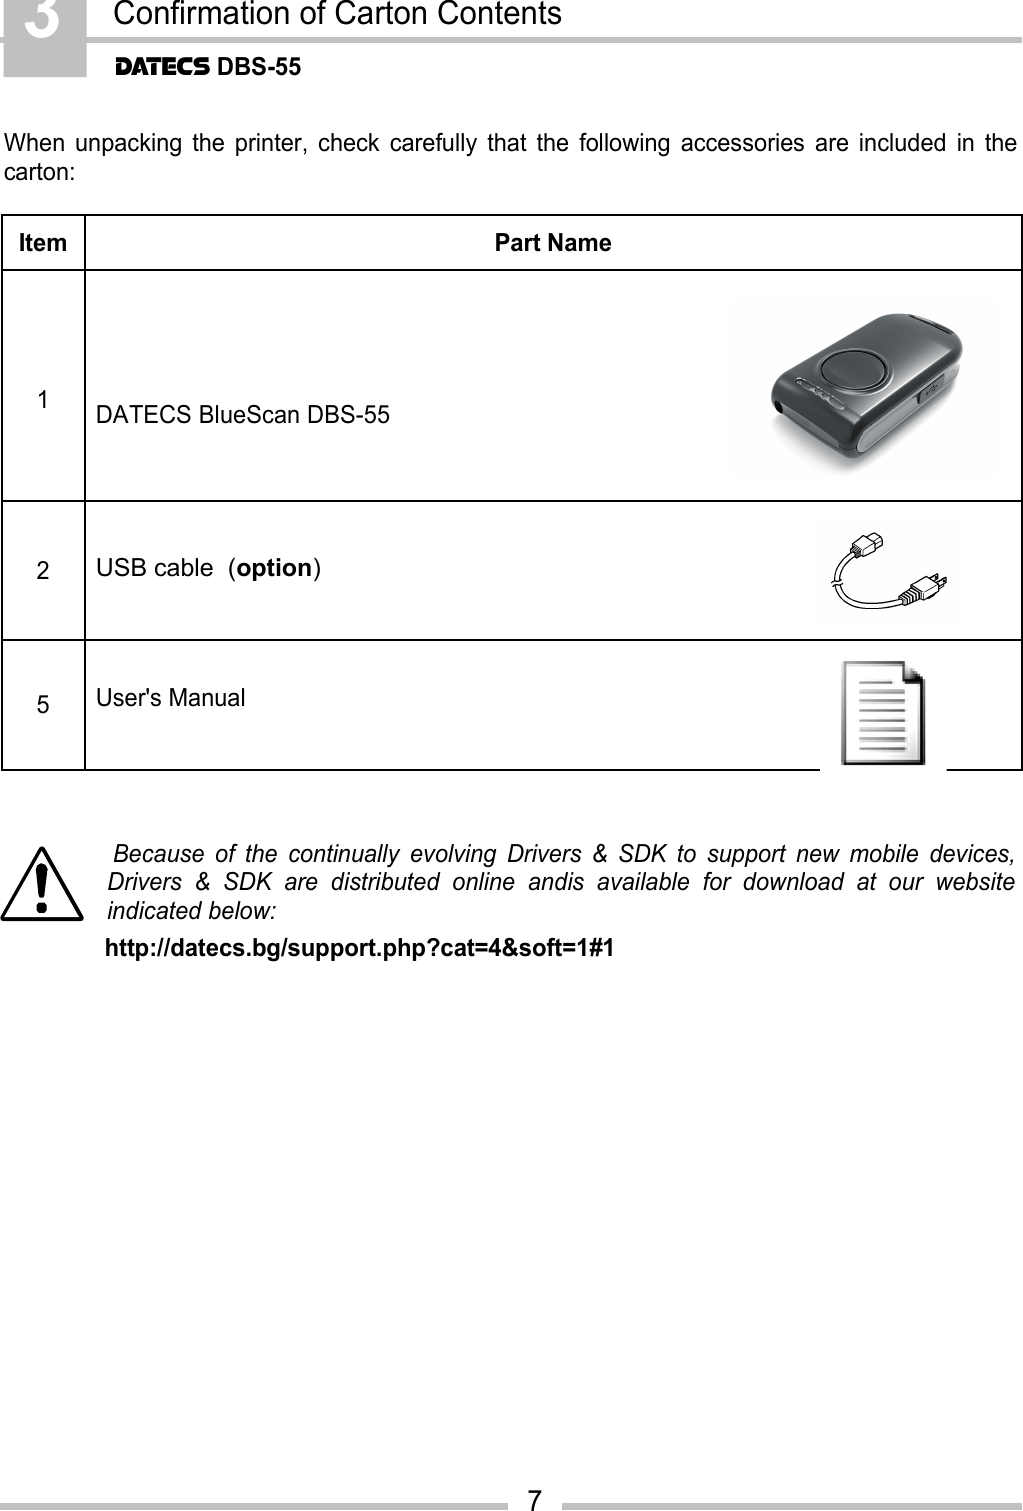 3Confirmation of Carton ContentsDATECS DBS-557When unpacking the printer, check carefully that the following accessories are included in thecarton:Item Part Name1DATECS BlueScan DBS-552USB cable  (option) 5User&apos;s ManualBecause of the continually evolving Drivers &amp; SDK to support new mobile devices,Drivers   &amp;   SDK   are   distributed   online   andis   available   for   download   at   our   websiteindicated below: http://datecs.bg/support.php?cat=4&amp;soft=1#1